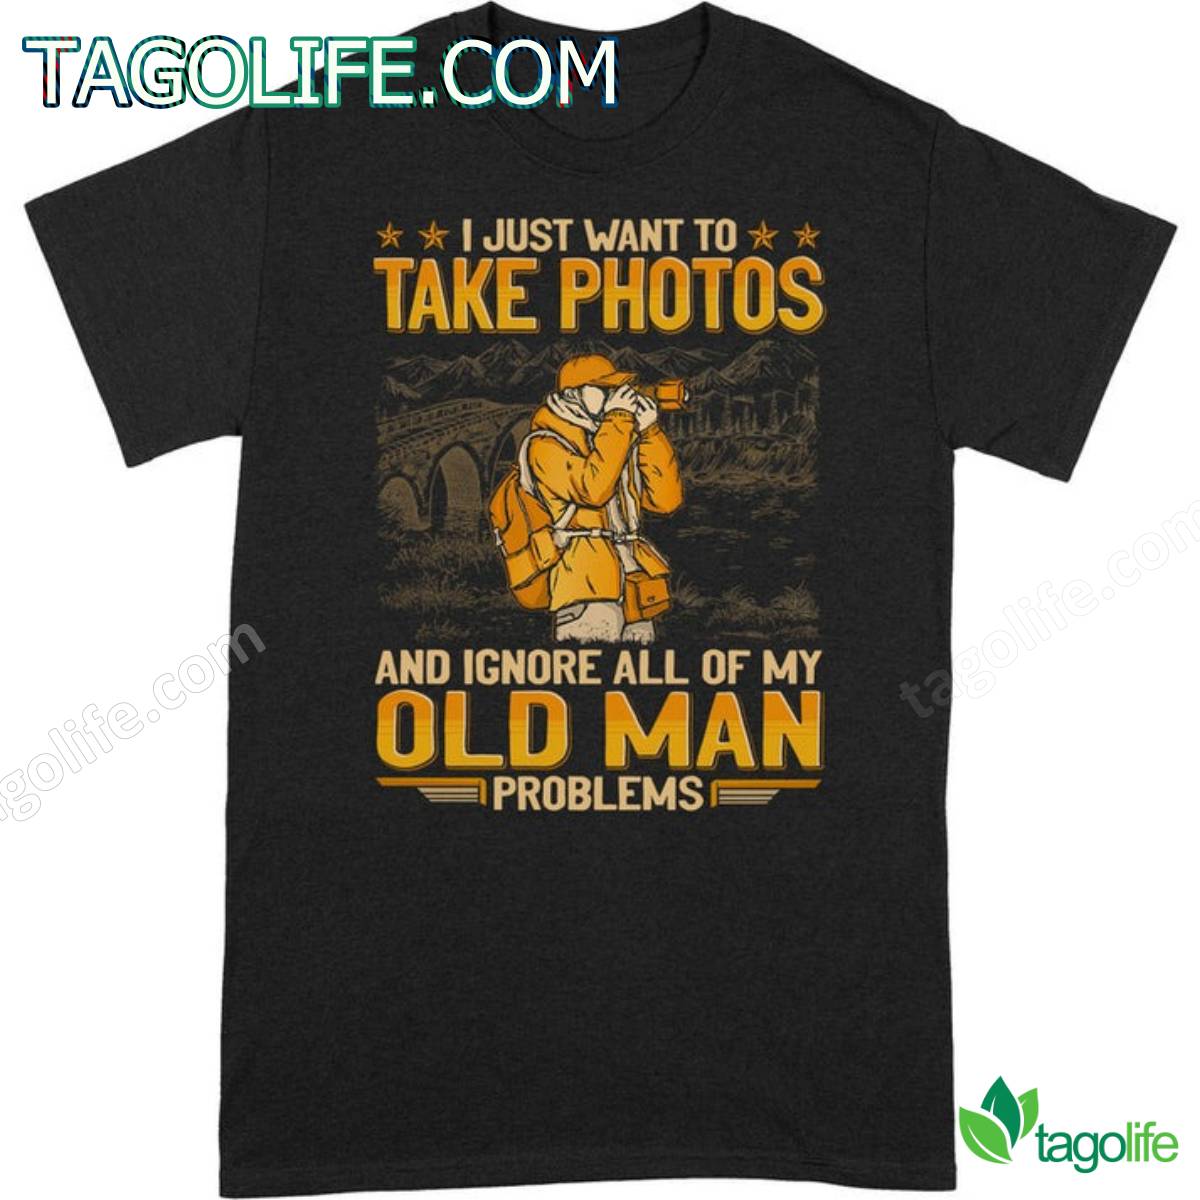 I Just Want To Take Photos And Ignore All Of My Old Man Problems T-Shirt